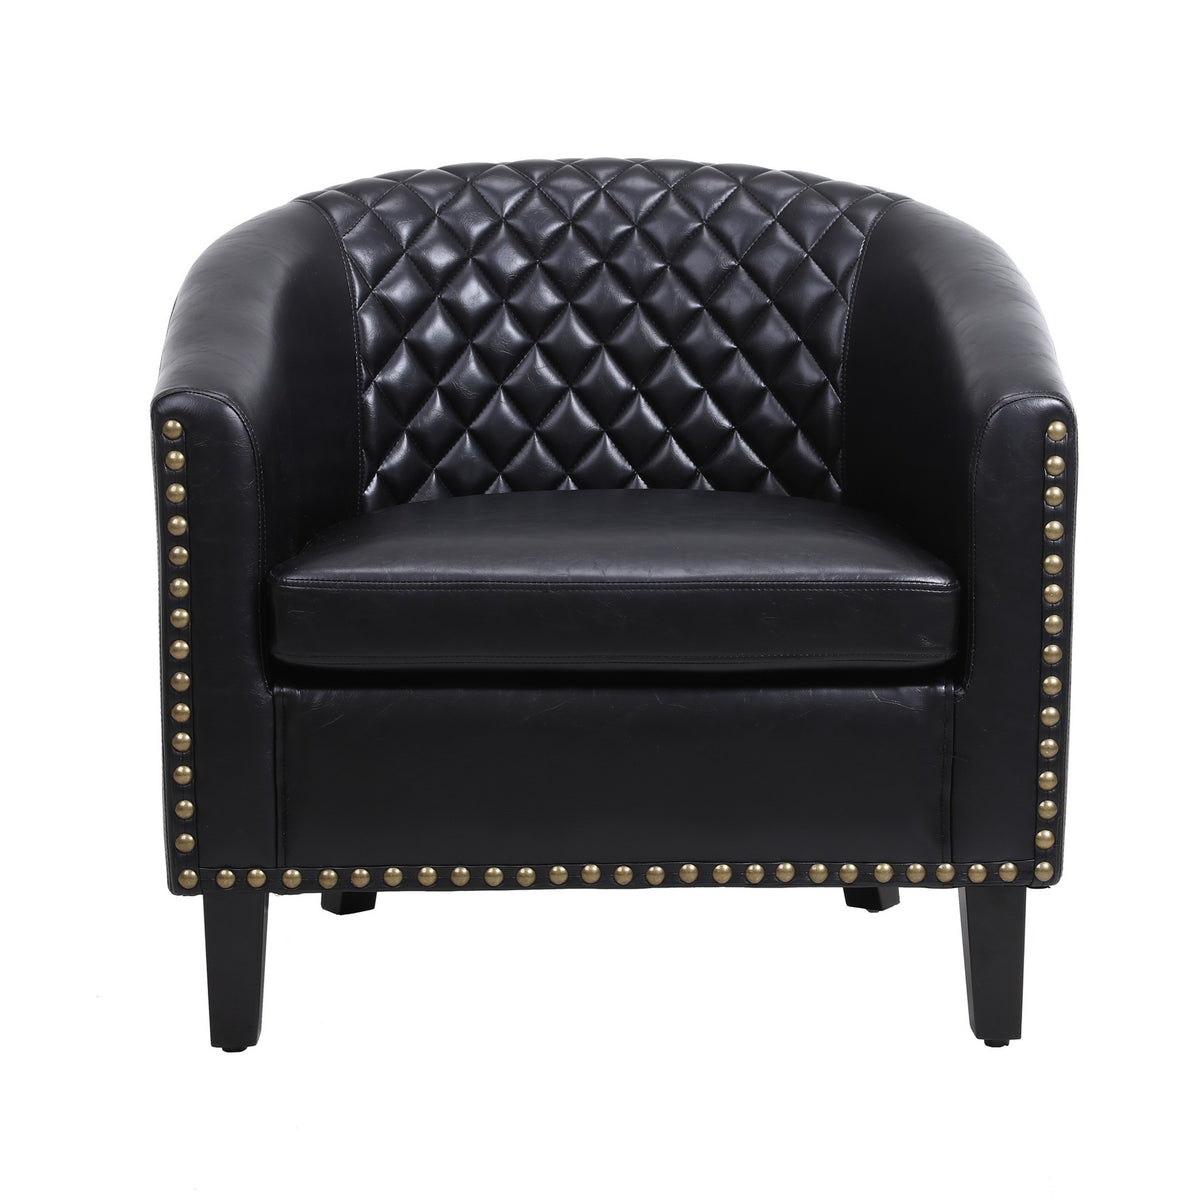 Leatherette Accent Chair with Nailhead Trim and Diamond Stitch, Black - BM261572